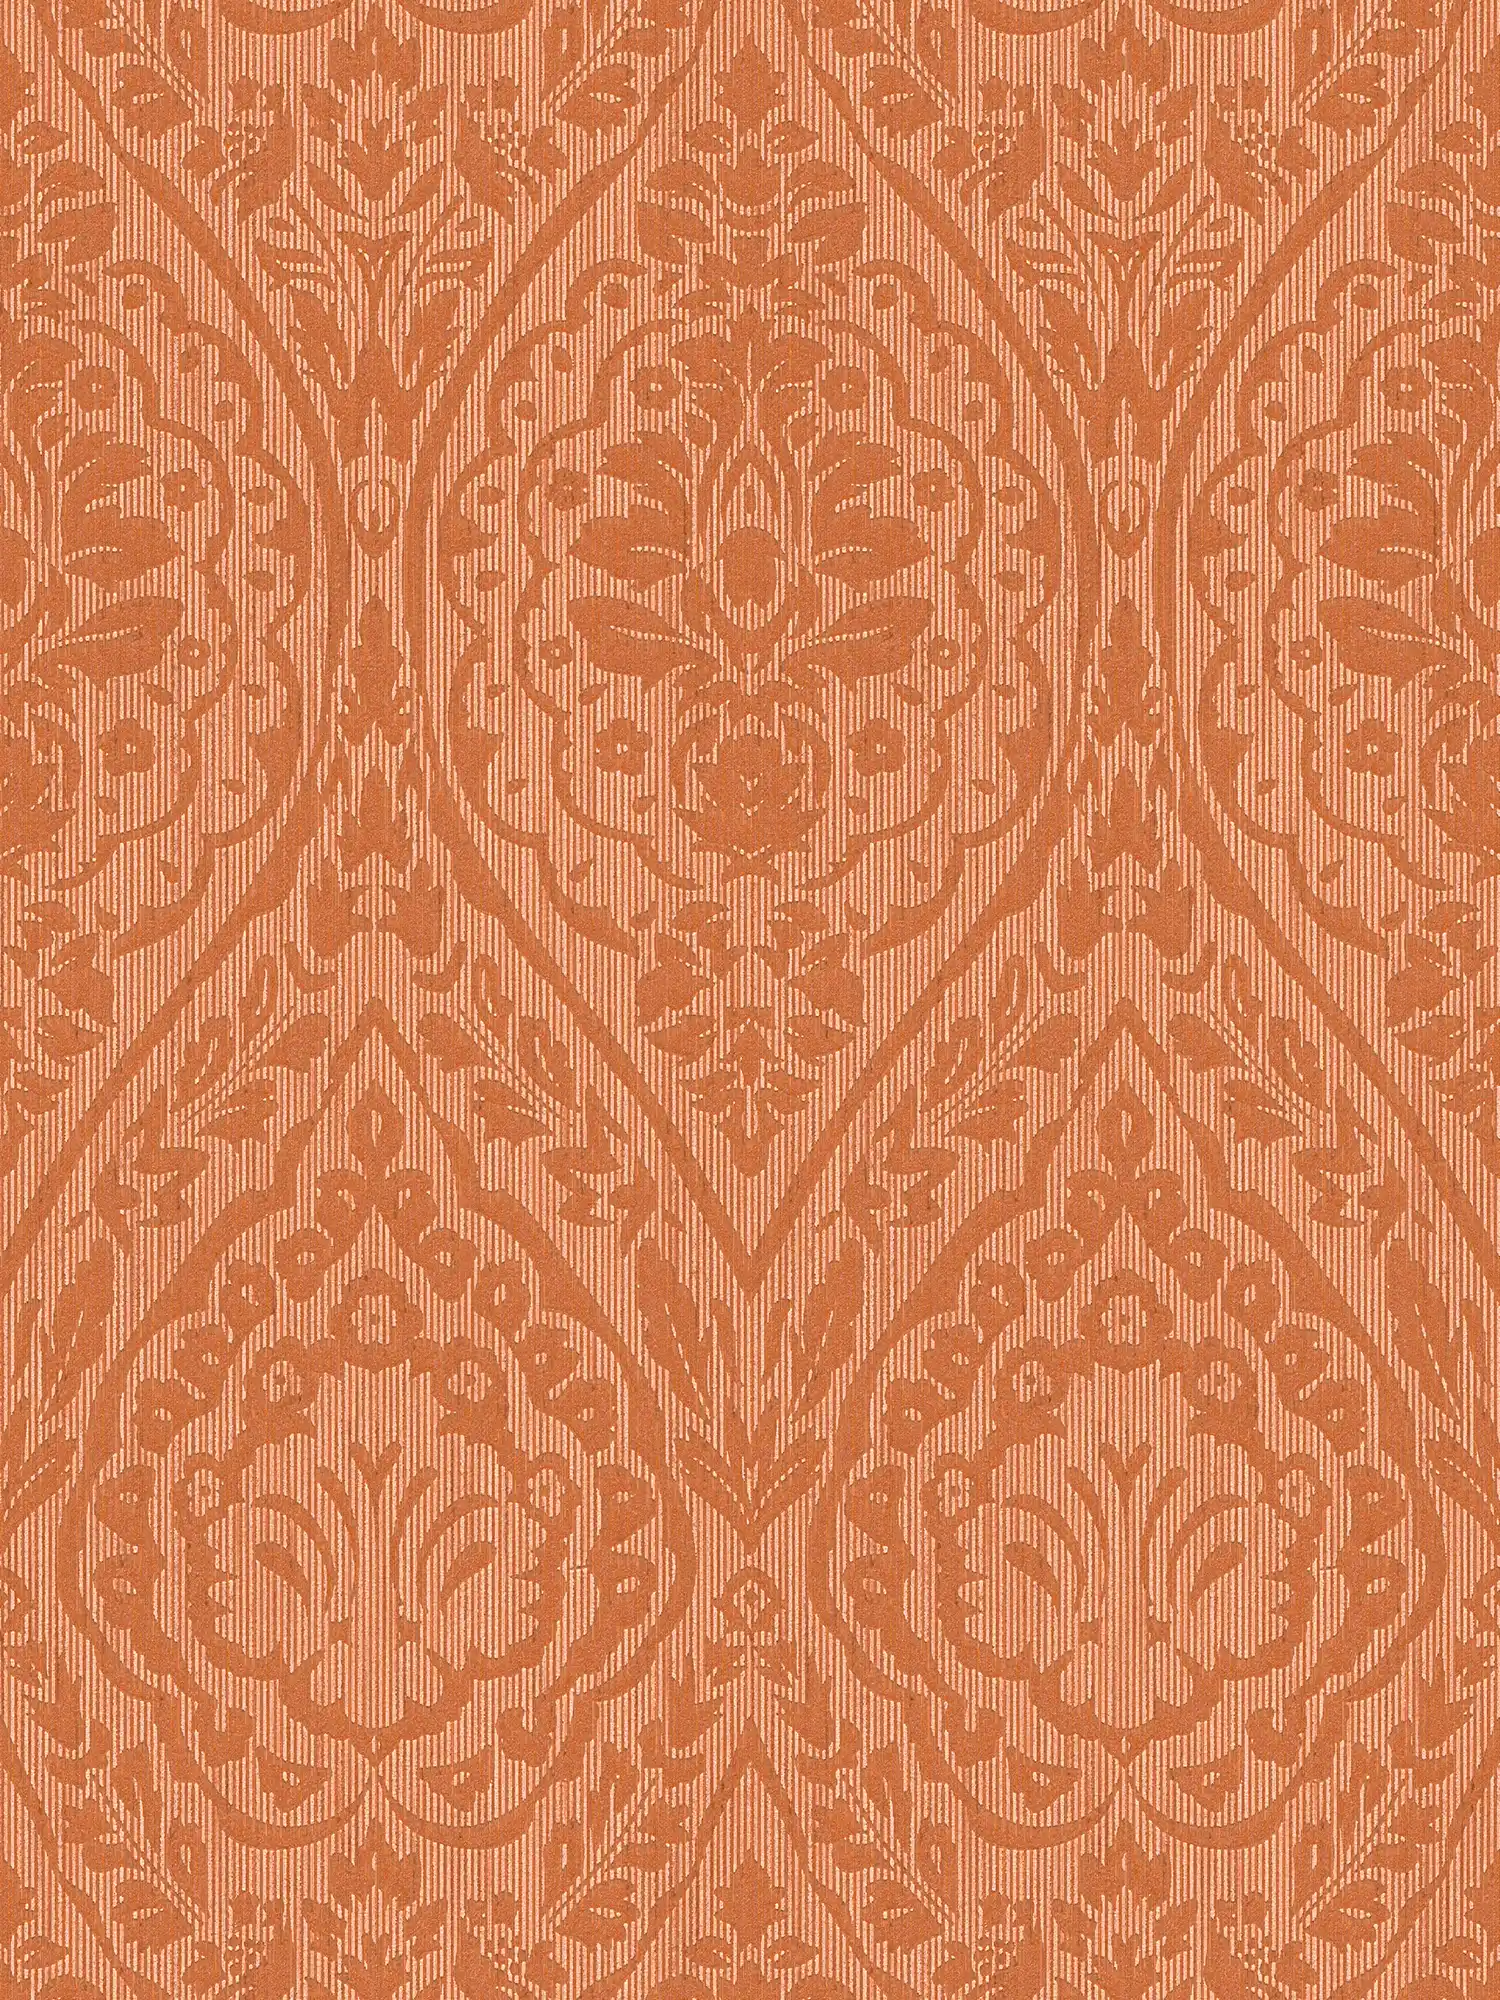 Wallpaper floral ornamental pattern with dimensional texture effect - orange
